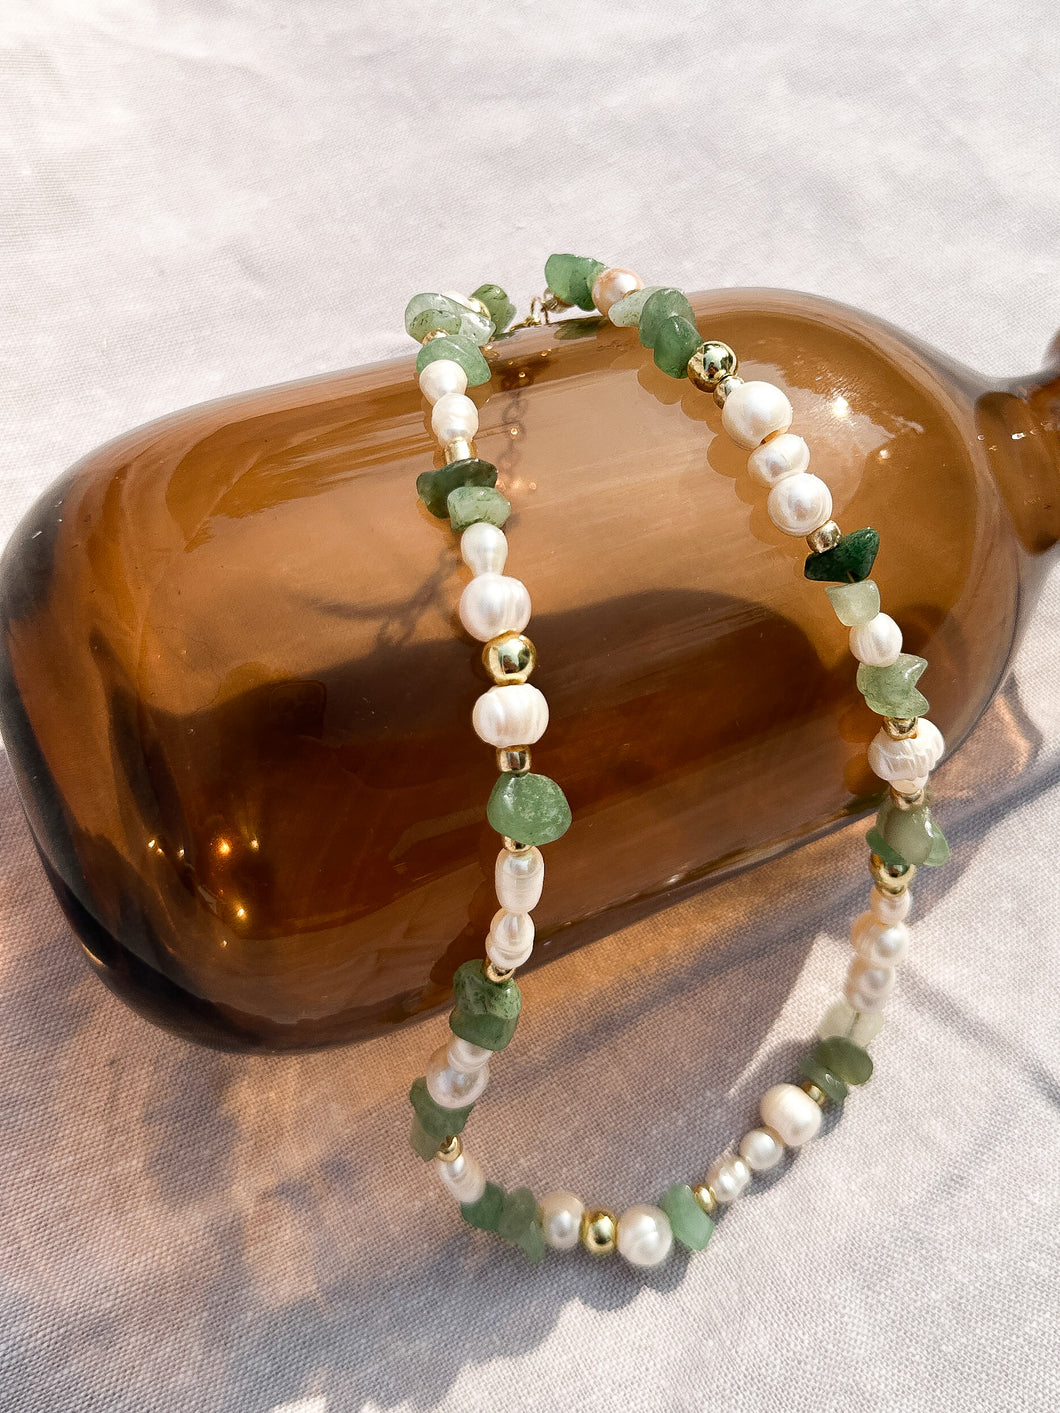 COMO | Freshwater pearl necklace with green aventurine